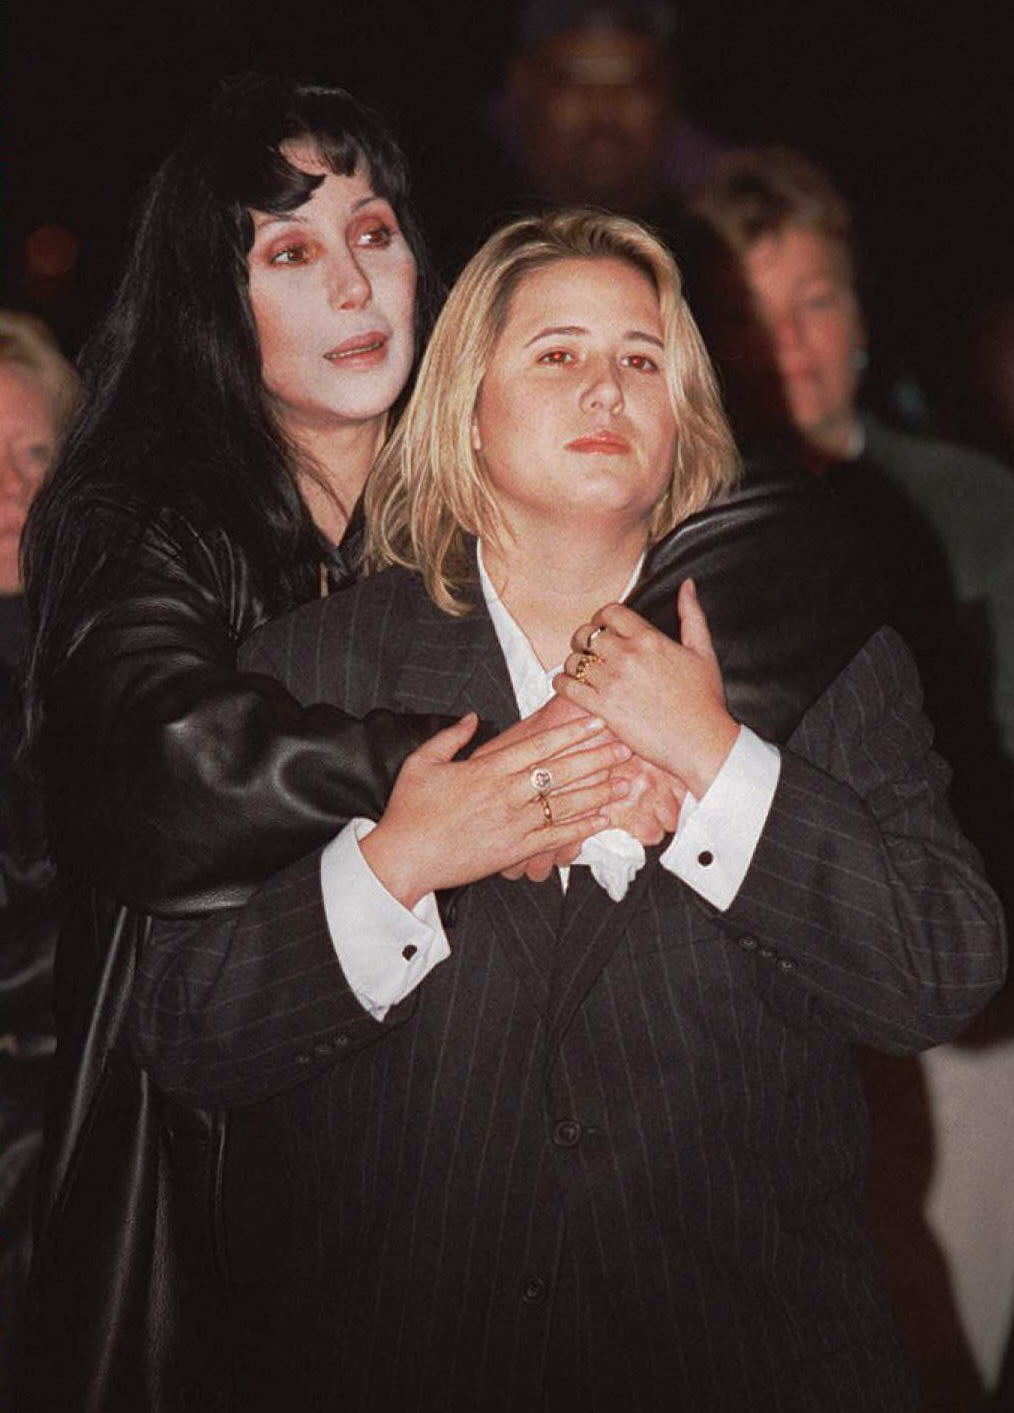 Cher pictured with her child Chastity Bono during a rally for "National Coming Out Day" on October 11, 1996 in Washington DC | Source: Getty Images